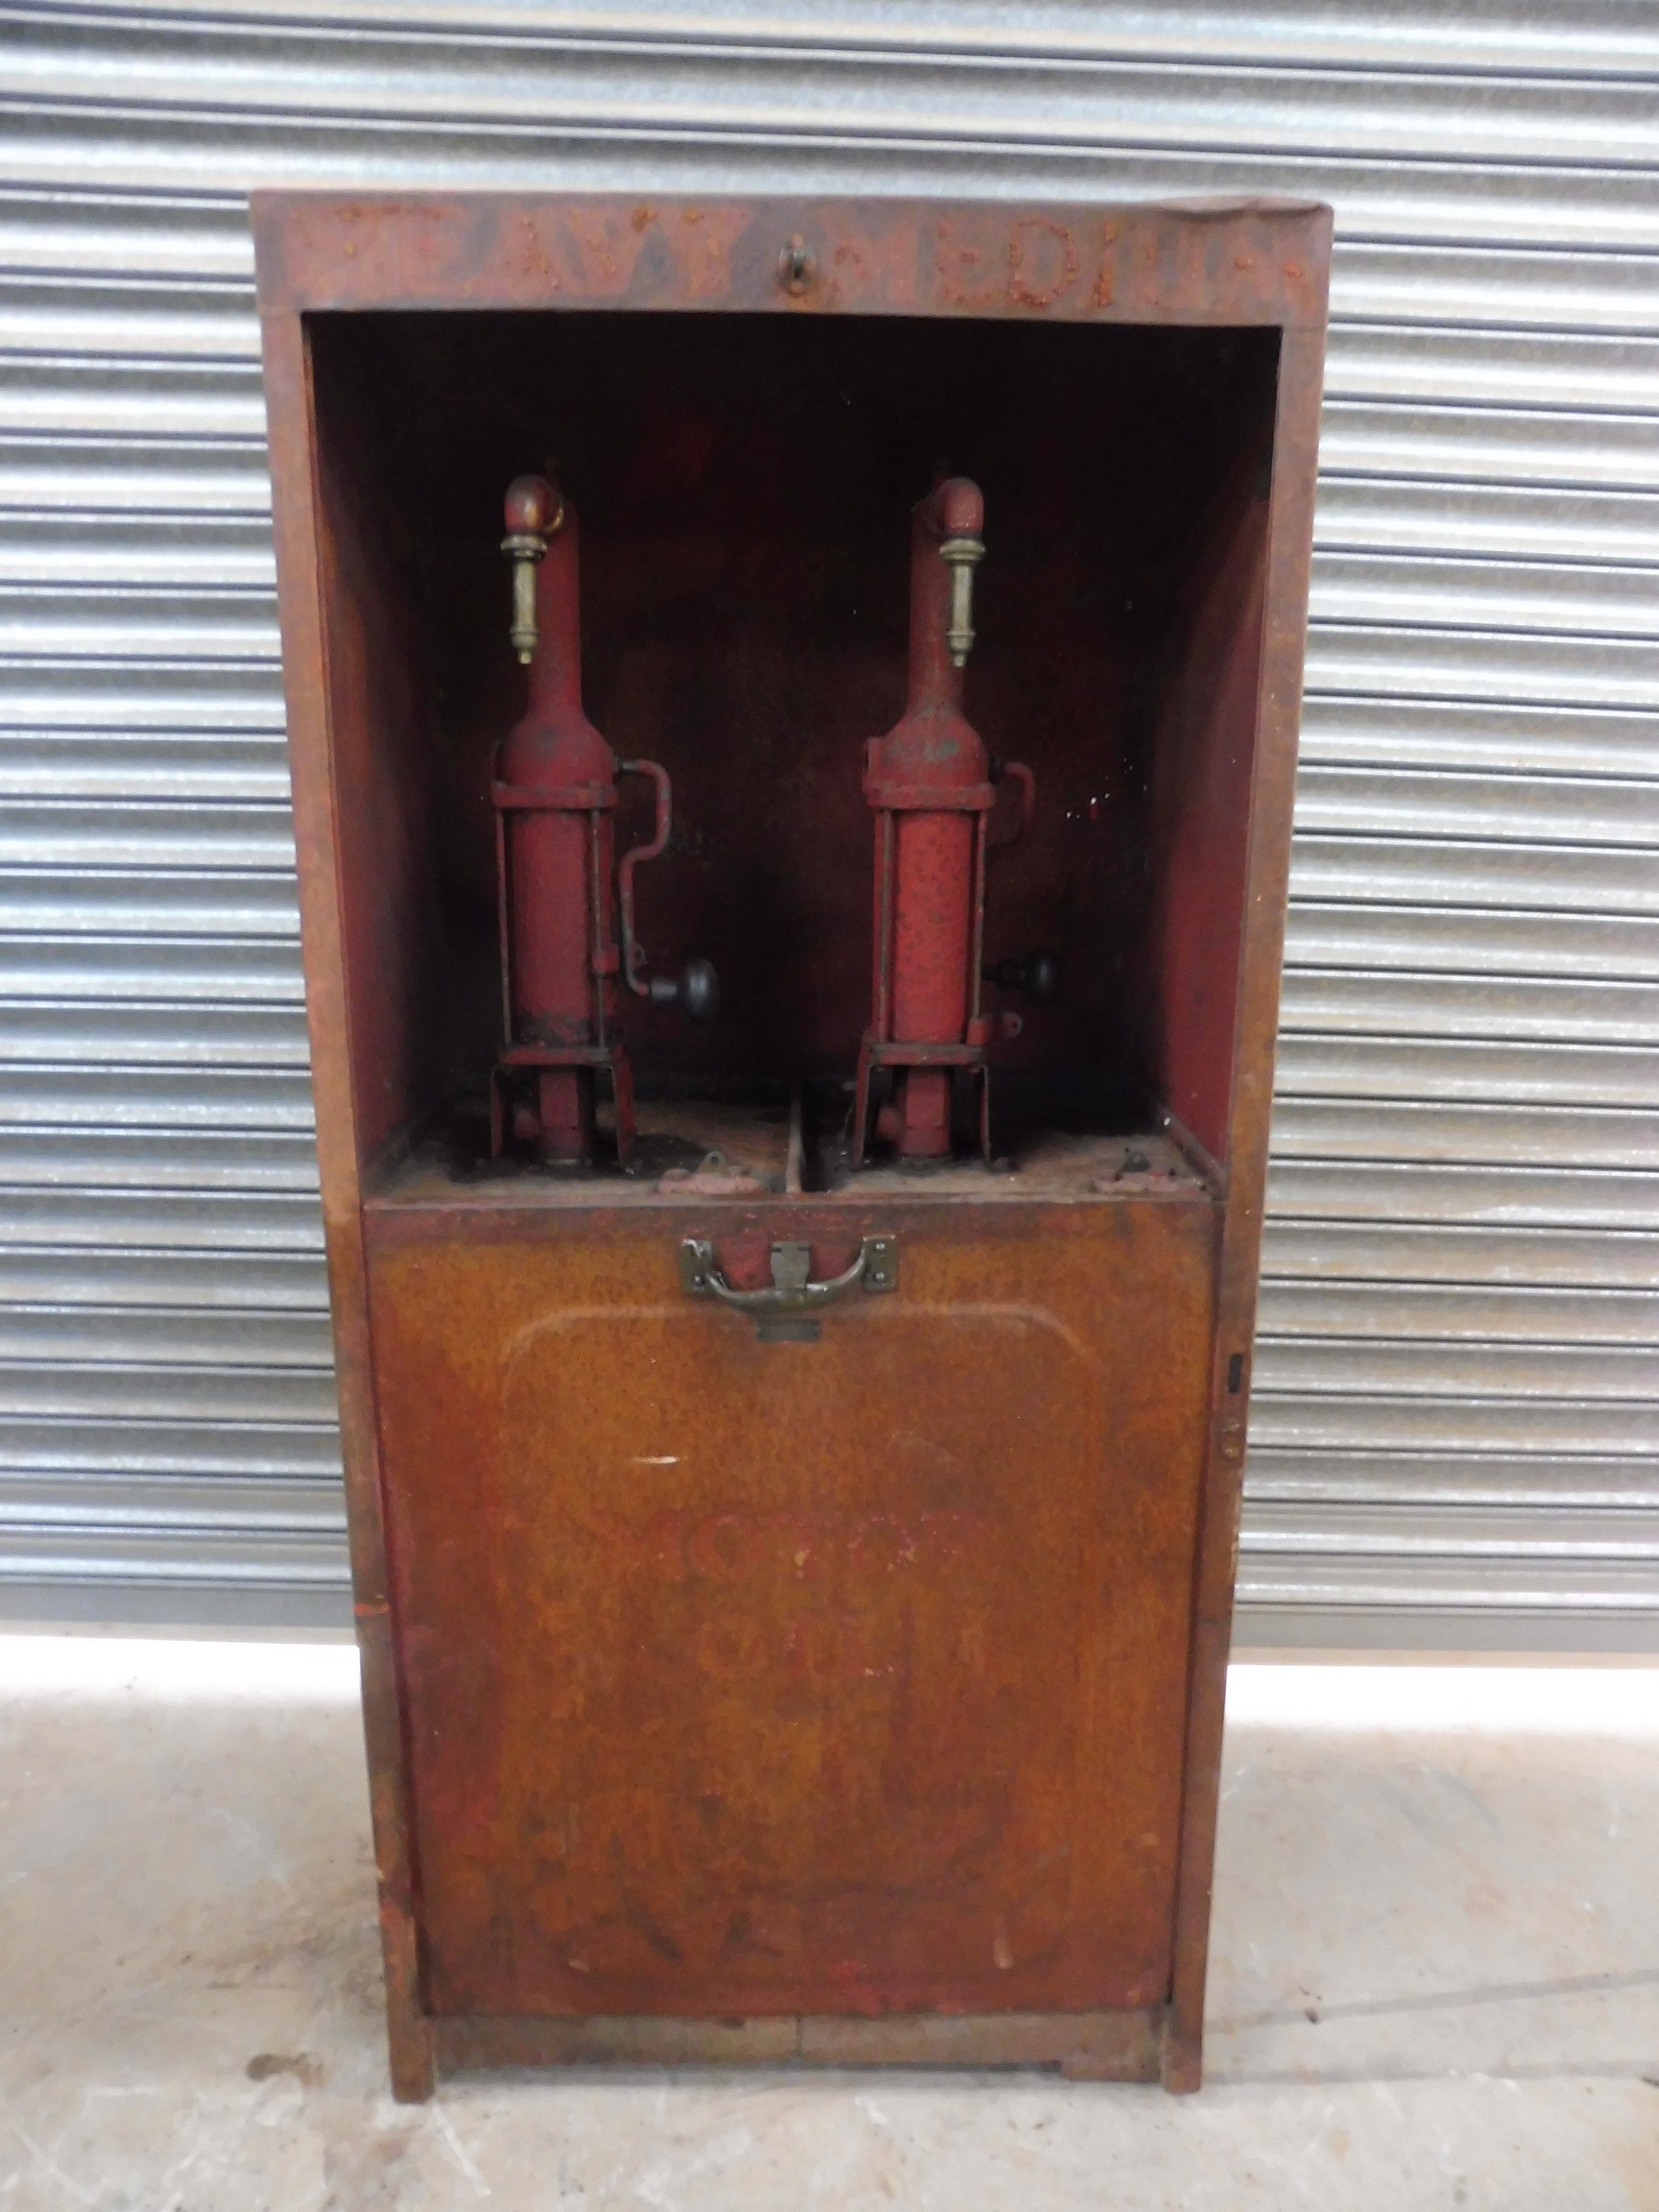 An early Shell garage forecourt oil cabinet with original robot/stick man decoration.